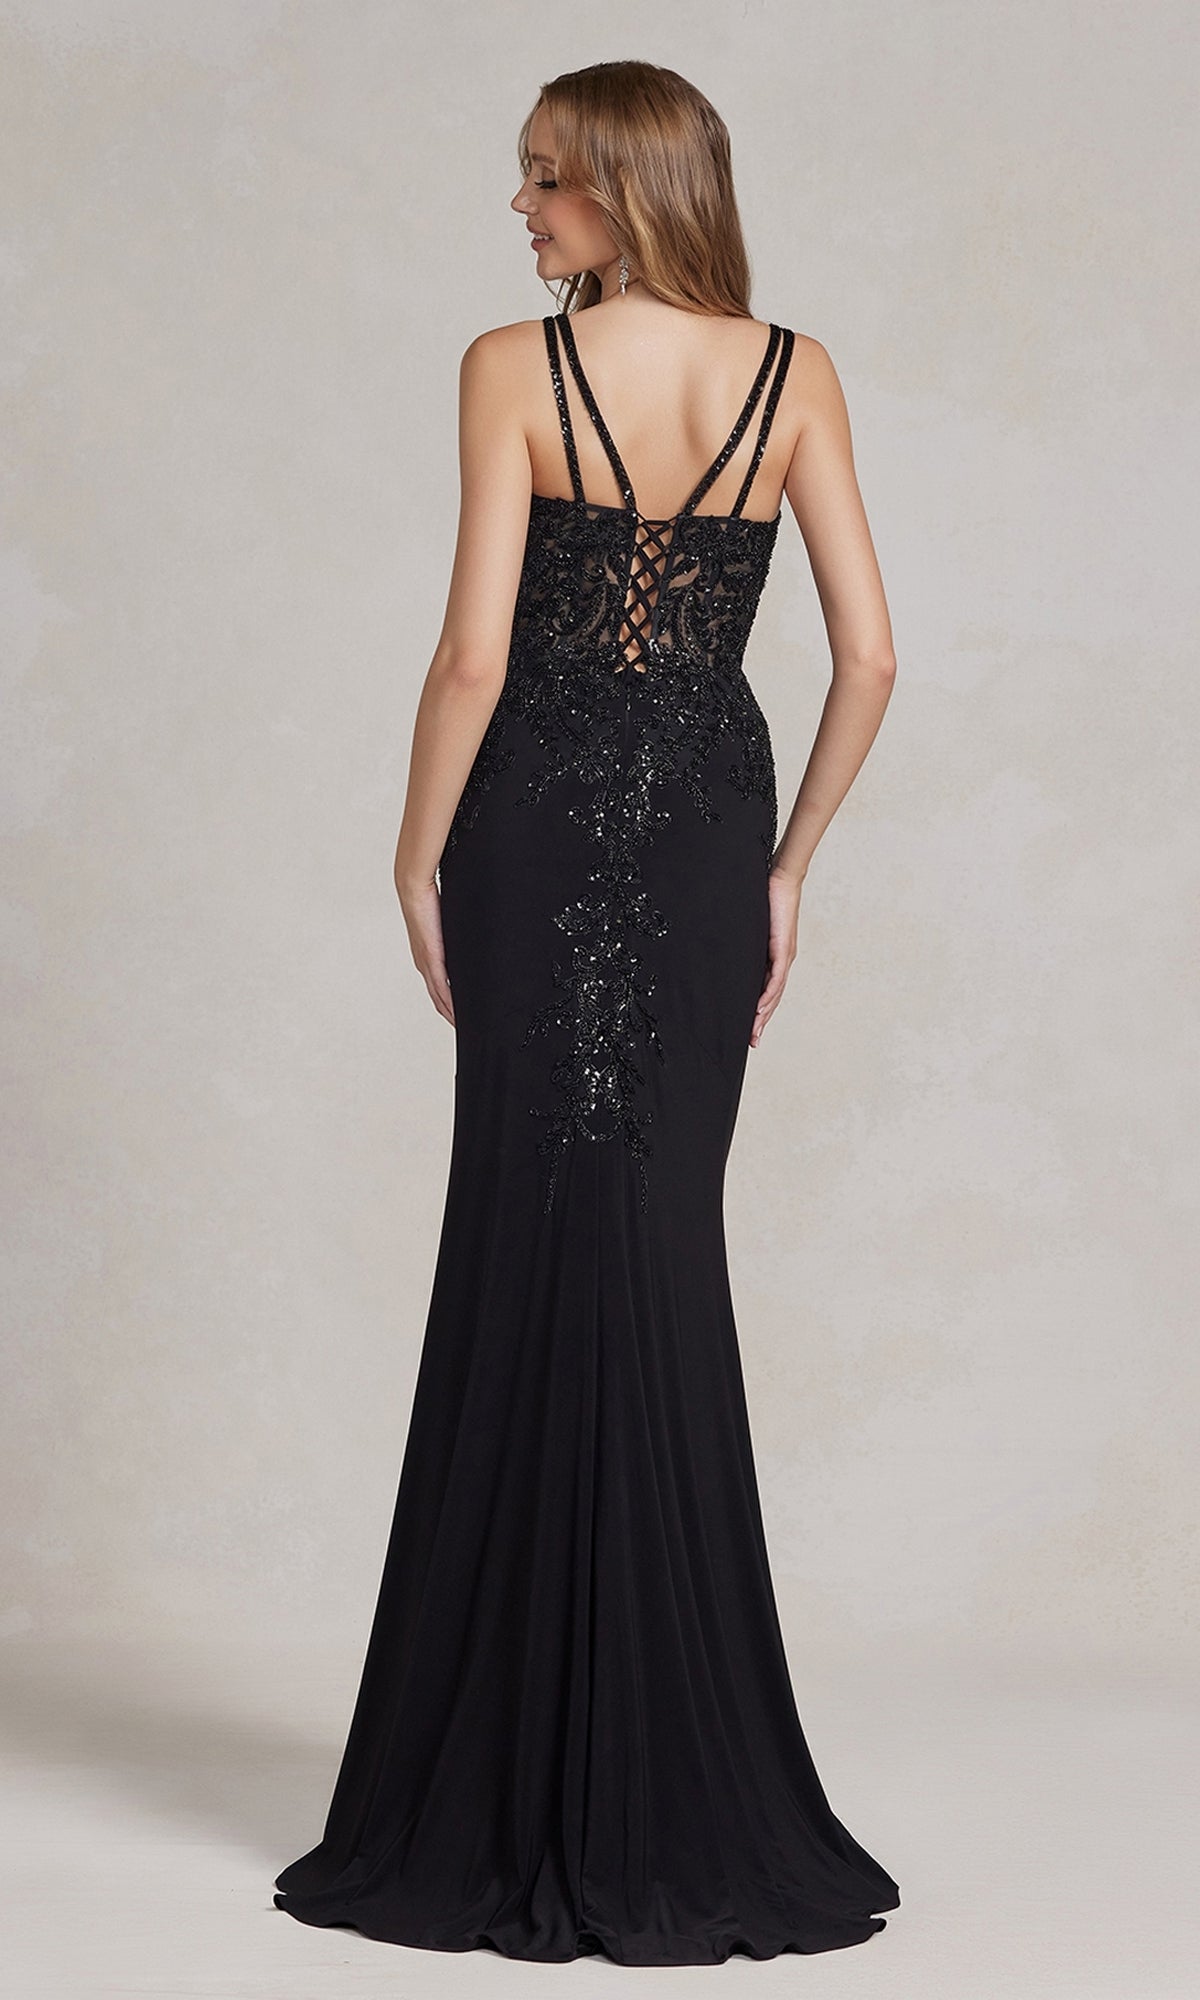 Sleek Long Formal Prom Gown by Nox Anabel - PromGirl